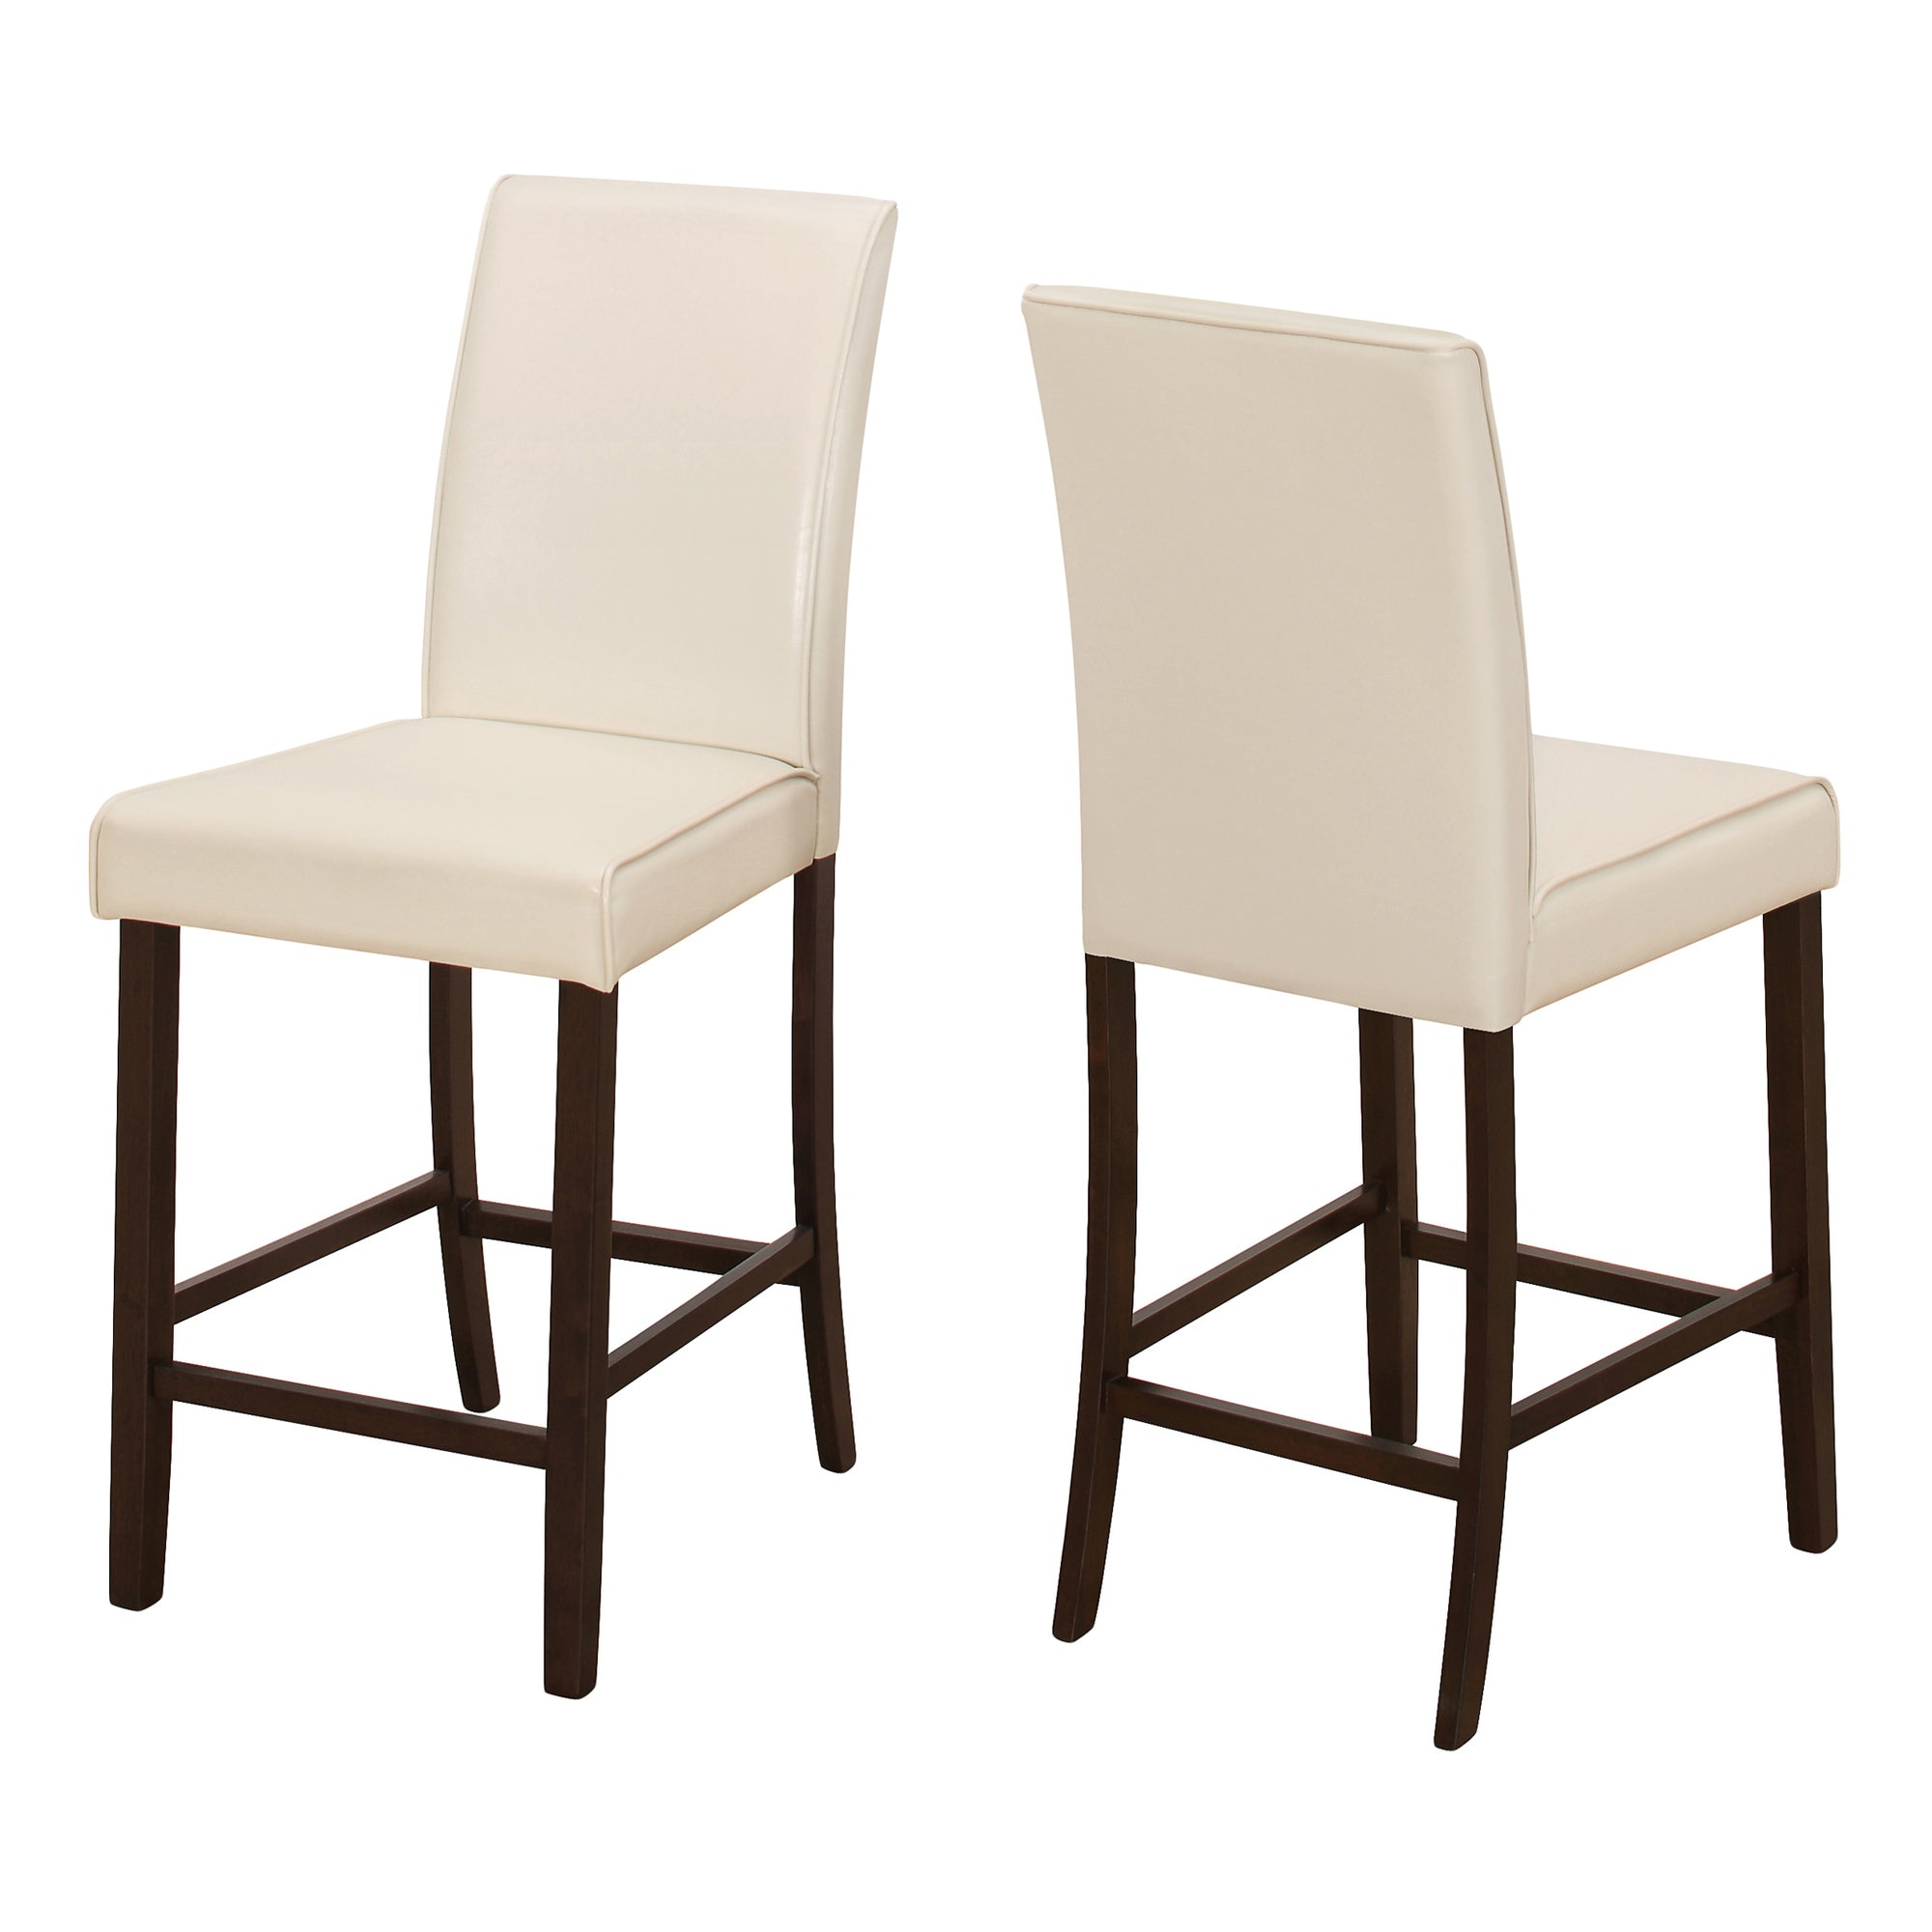 DINING CHAIR - 2PCS / BROWN LEATHER-LOOK COUNTER HEIGHT